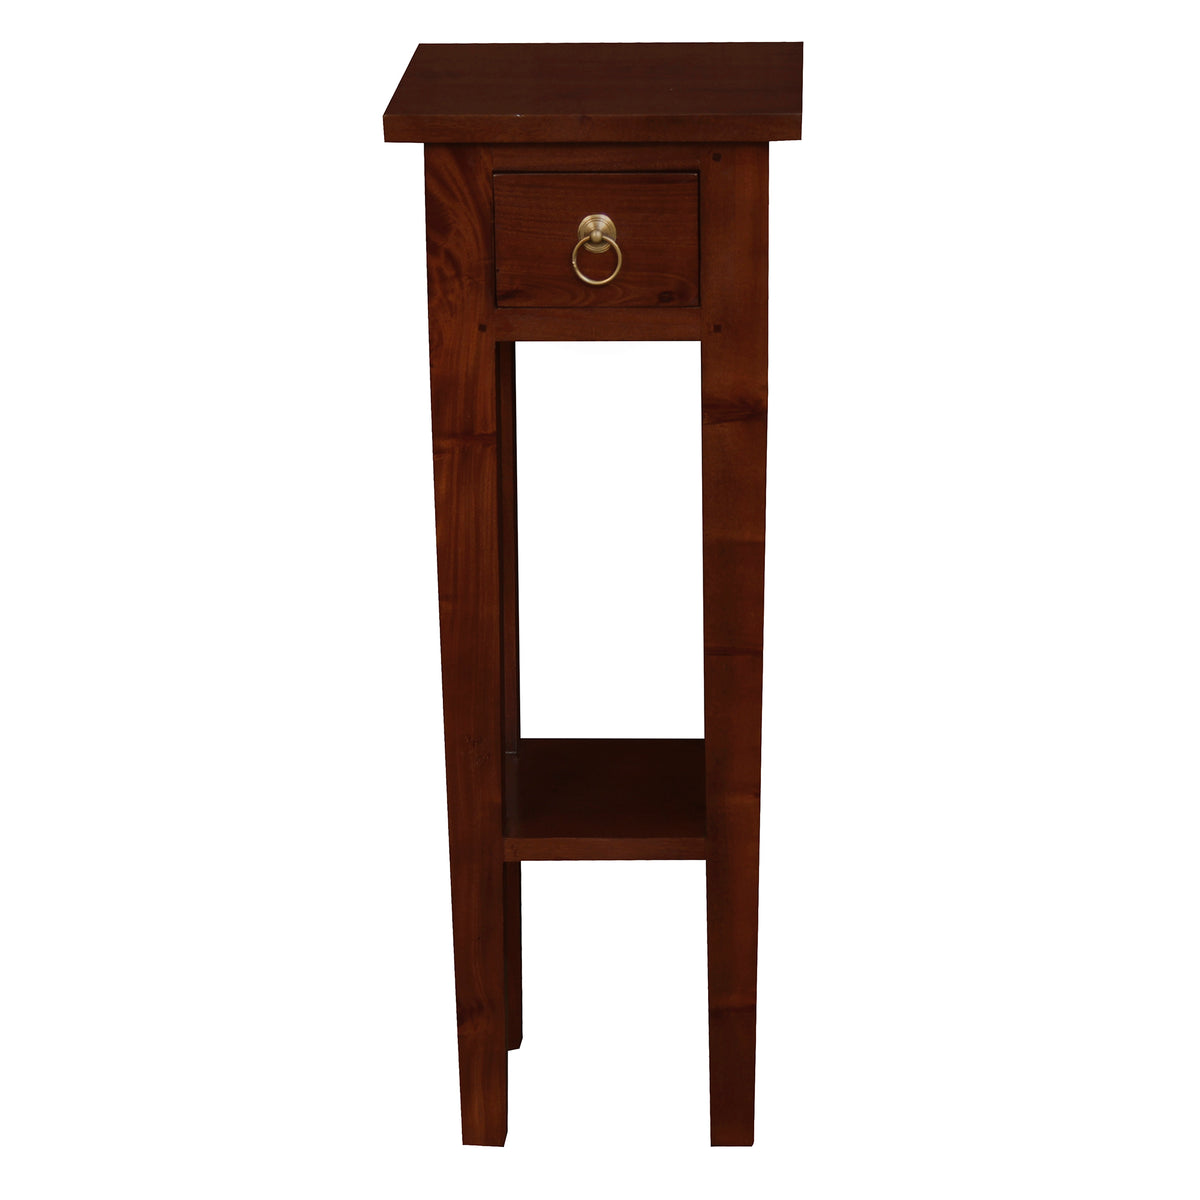 Fleur Timber 1 Drawer Plant Stand - Mahogany - Notbrand